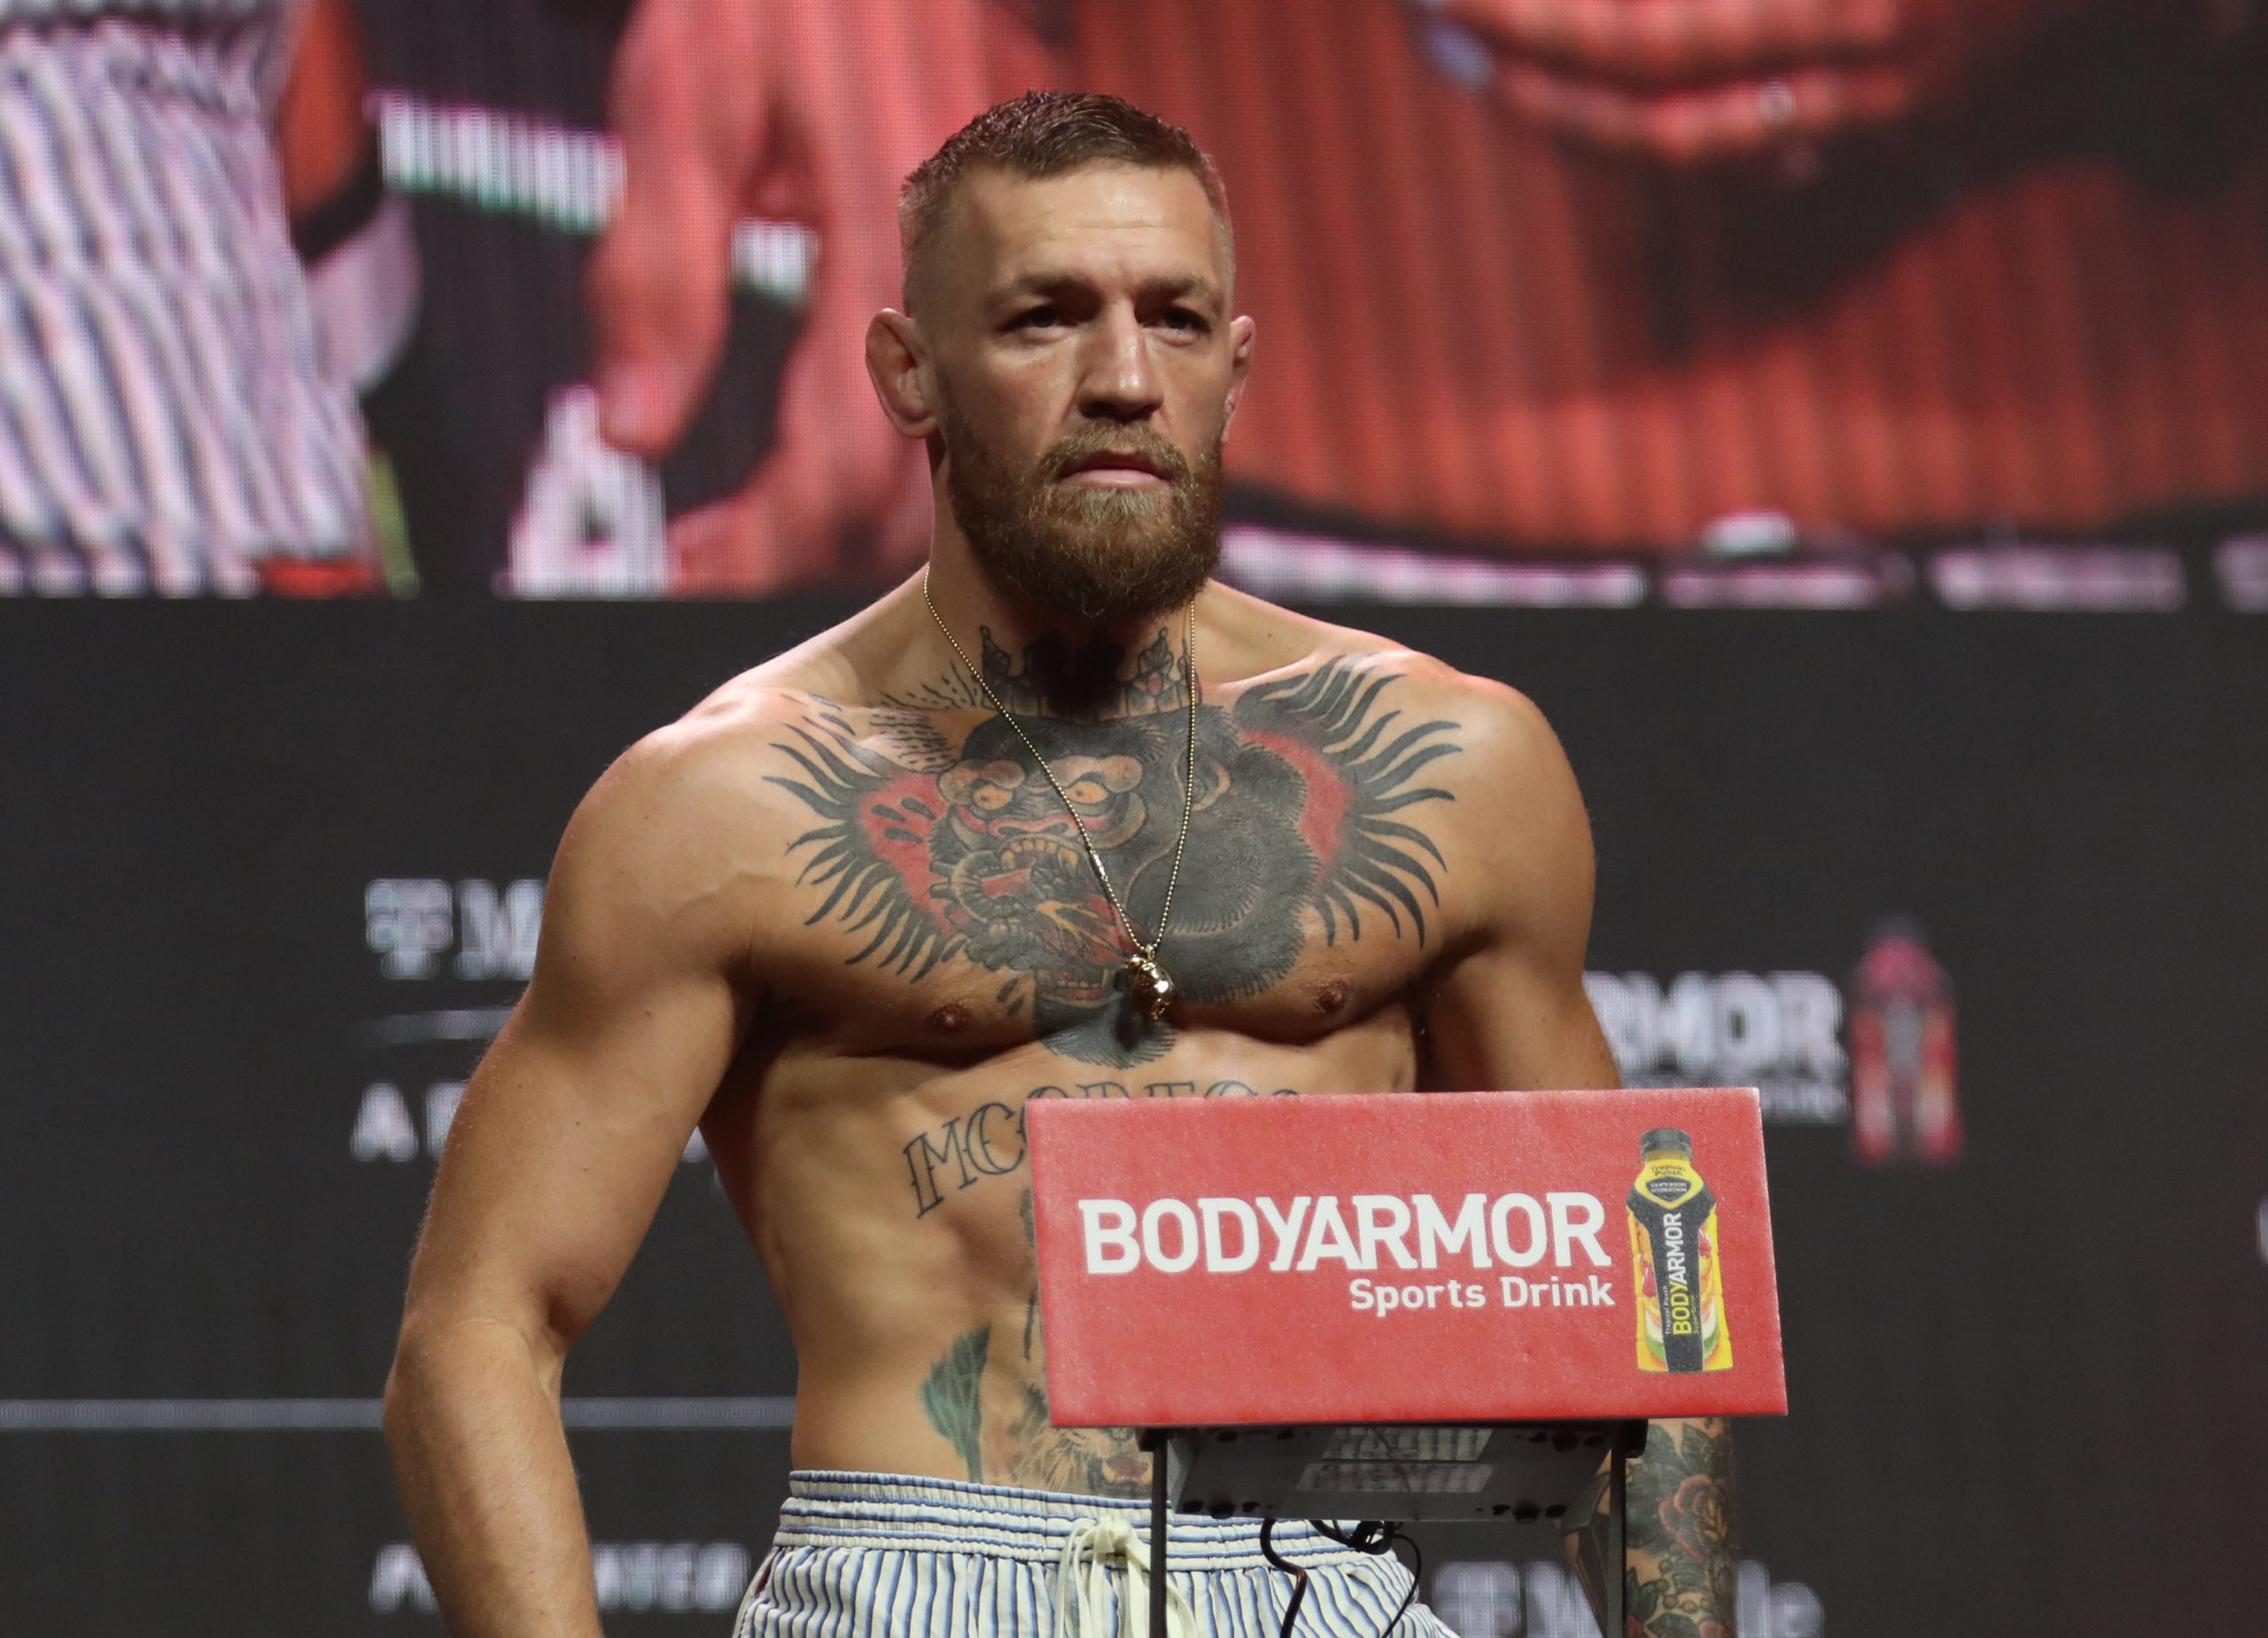 MMA - UFC264 - Dustin Poirier v Conor McGregor - Weigh in - T-Mobile Arena, Las Vegas, United States - July 9, 2021 Conor McGregor during  the weigh-in 